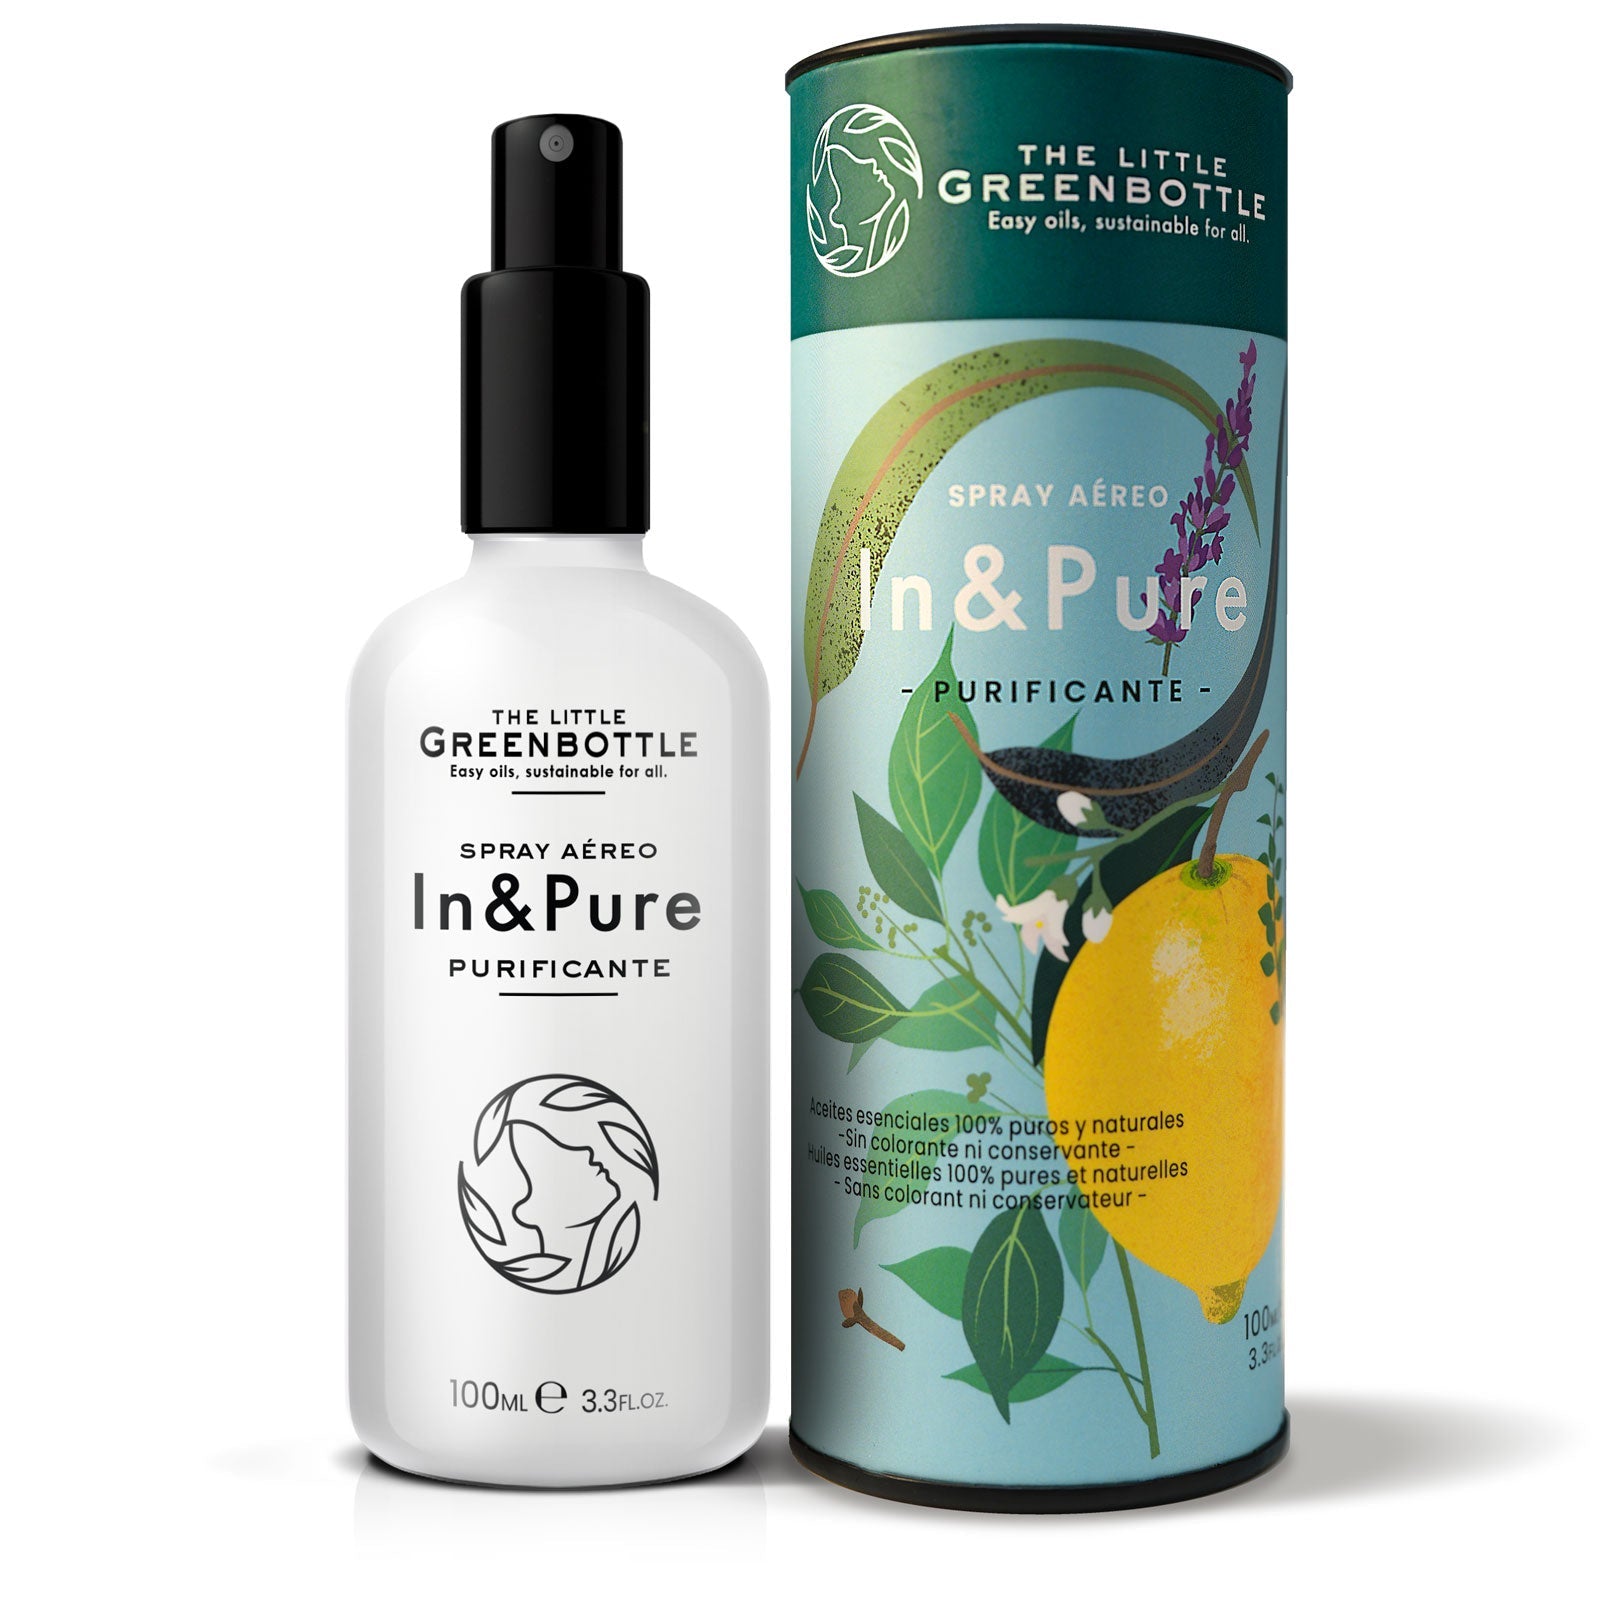 Spray aéreo IN &amp; PURE - Purificante TLGB